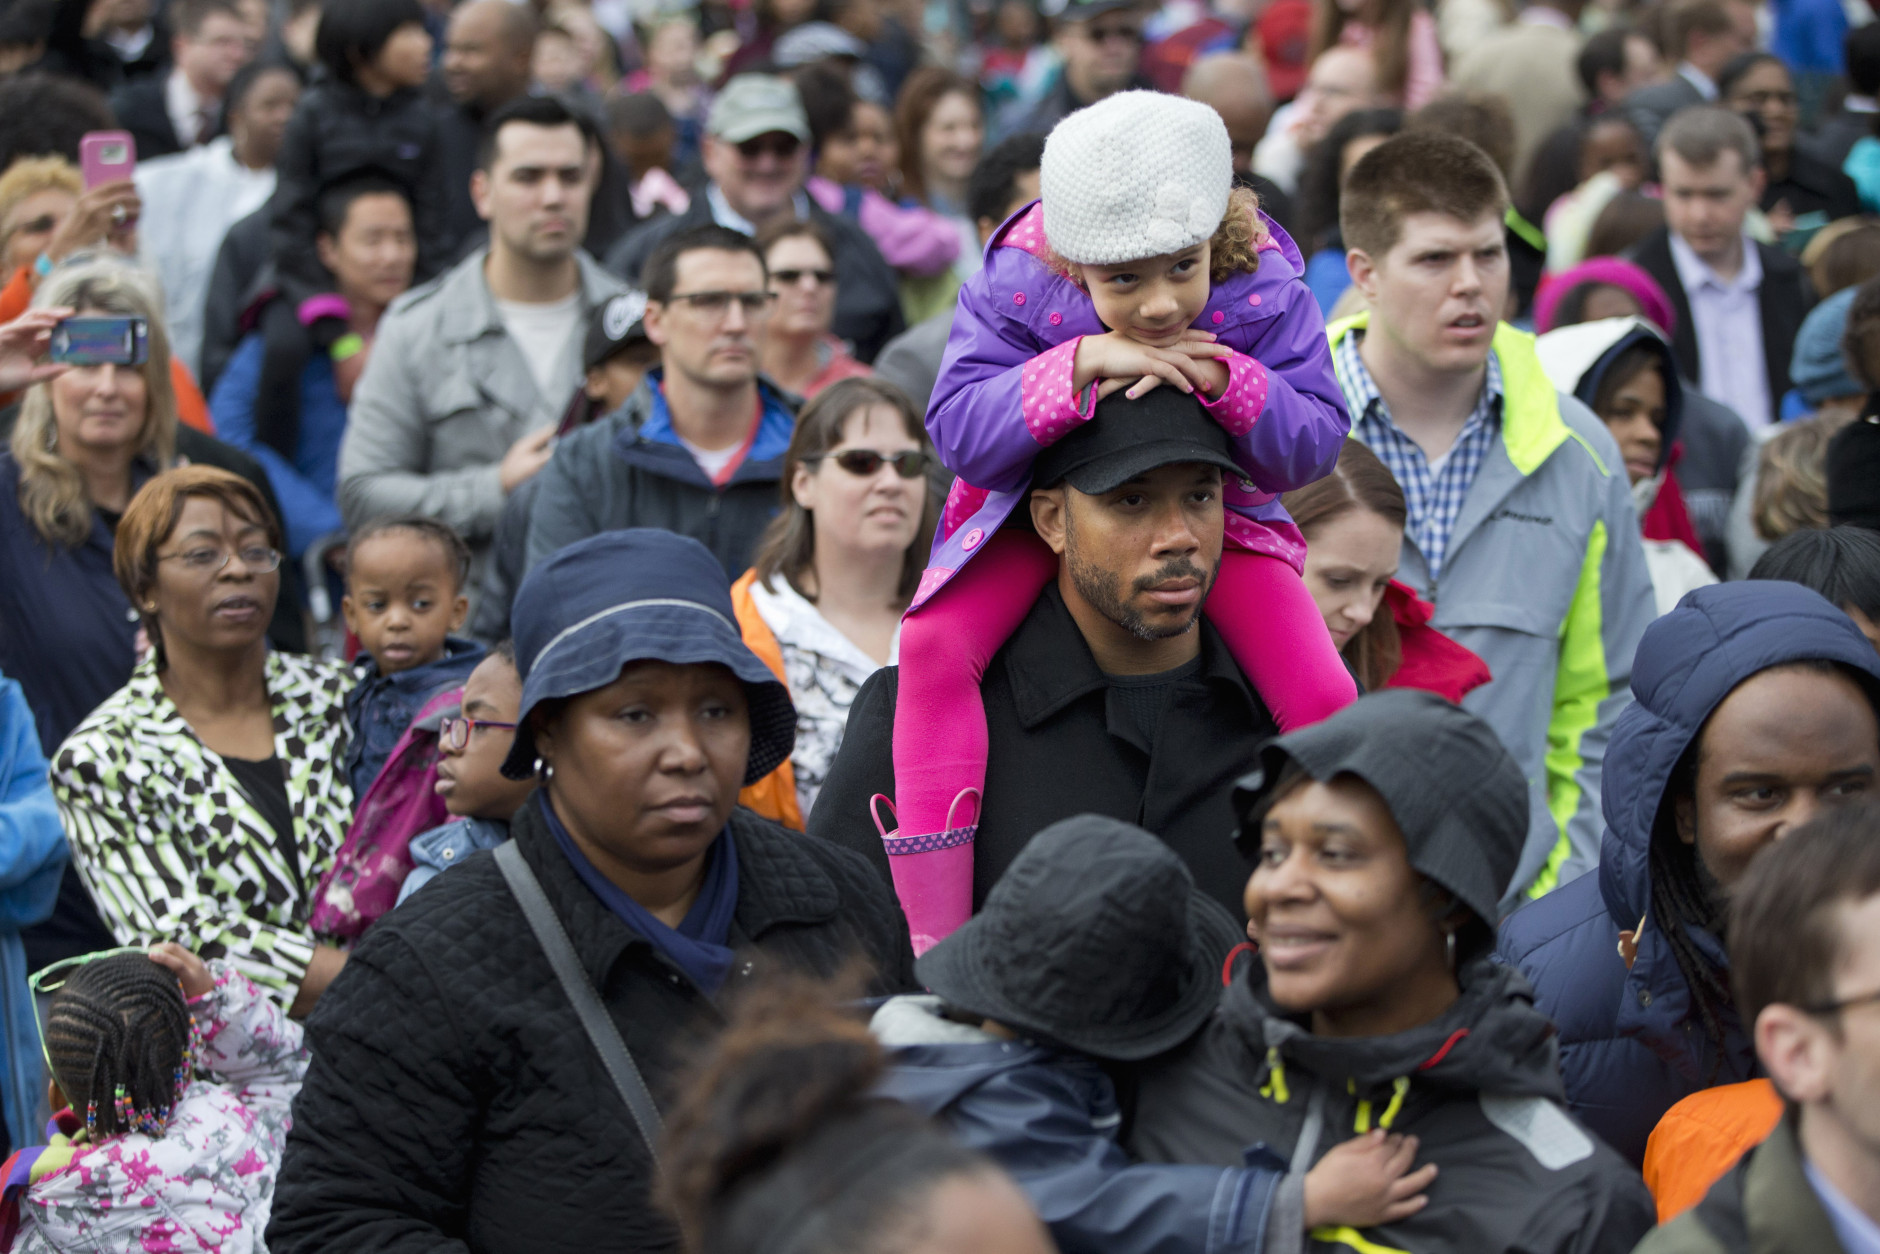 A child sits on a man's shoulders as they wait for the arrival of President Barack Obama for the White House Easter Egg Roll on the South Lawn of the White House in Washington, Monday, March 28, 2016. Thousands of children gathered at the White House for the annual Easter Egg Roll. This year's event features  live music, sports courts, cooking stations, storytelling, and Easter egg rolling. (AP Photo/Jacquelyn Martin)